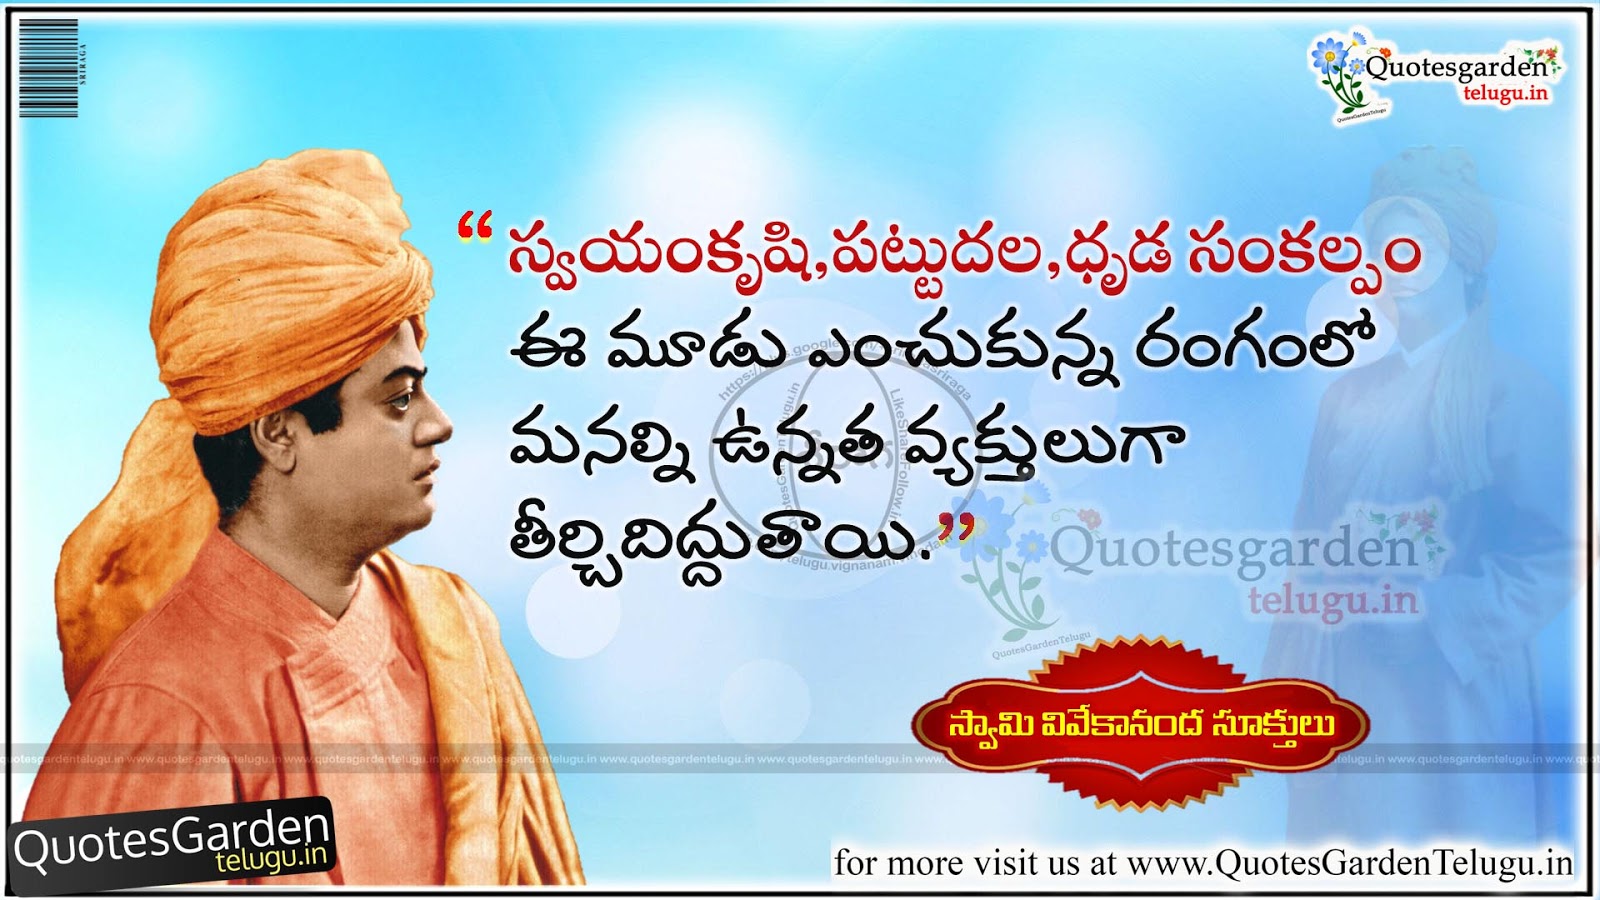 Swami Vivekananda Great Quotes And Sayings in Telugu | QUOTES GARDEN